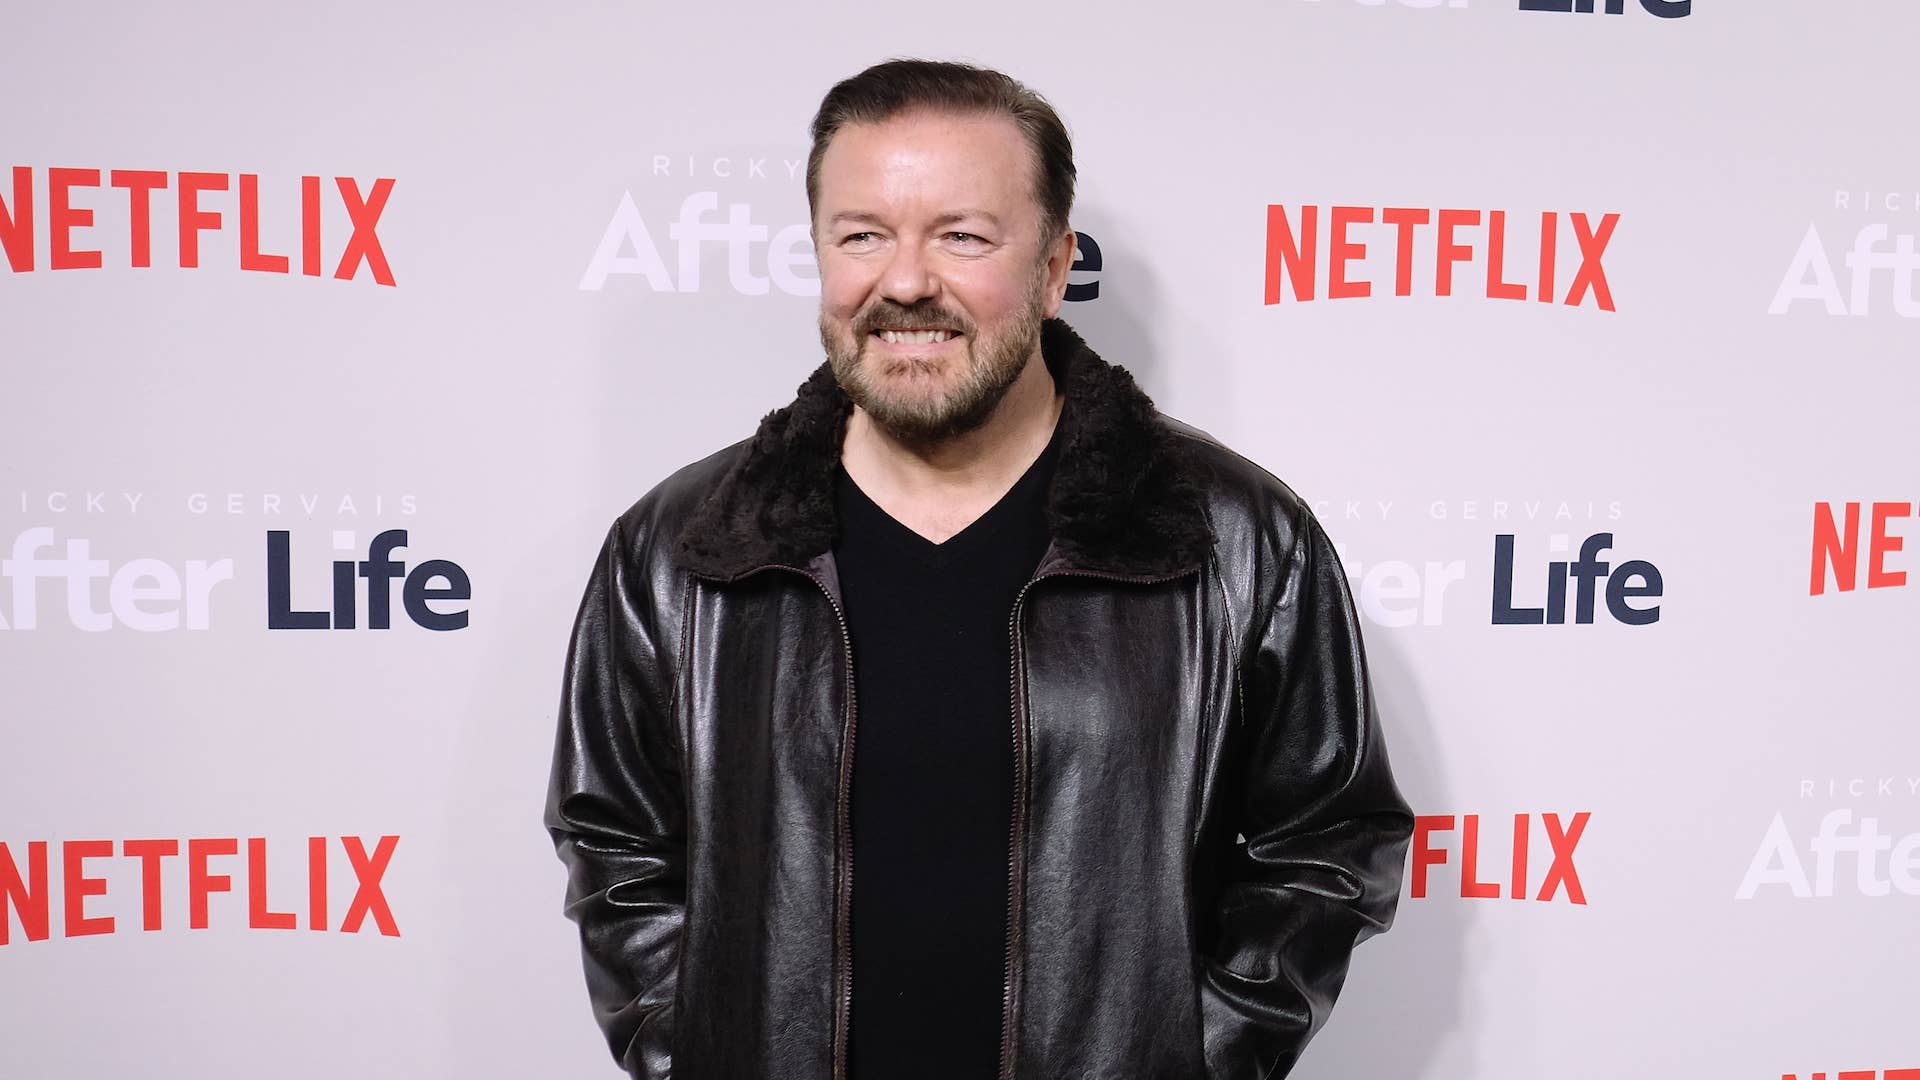 Ricky Gervais attends the "After Life" For Your Consideration Event.